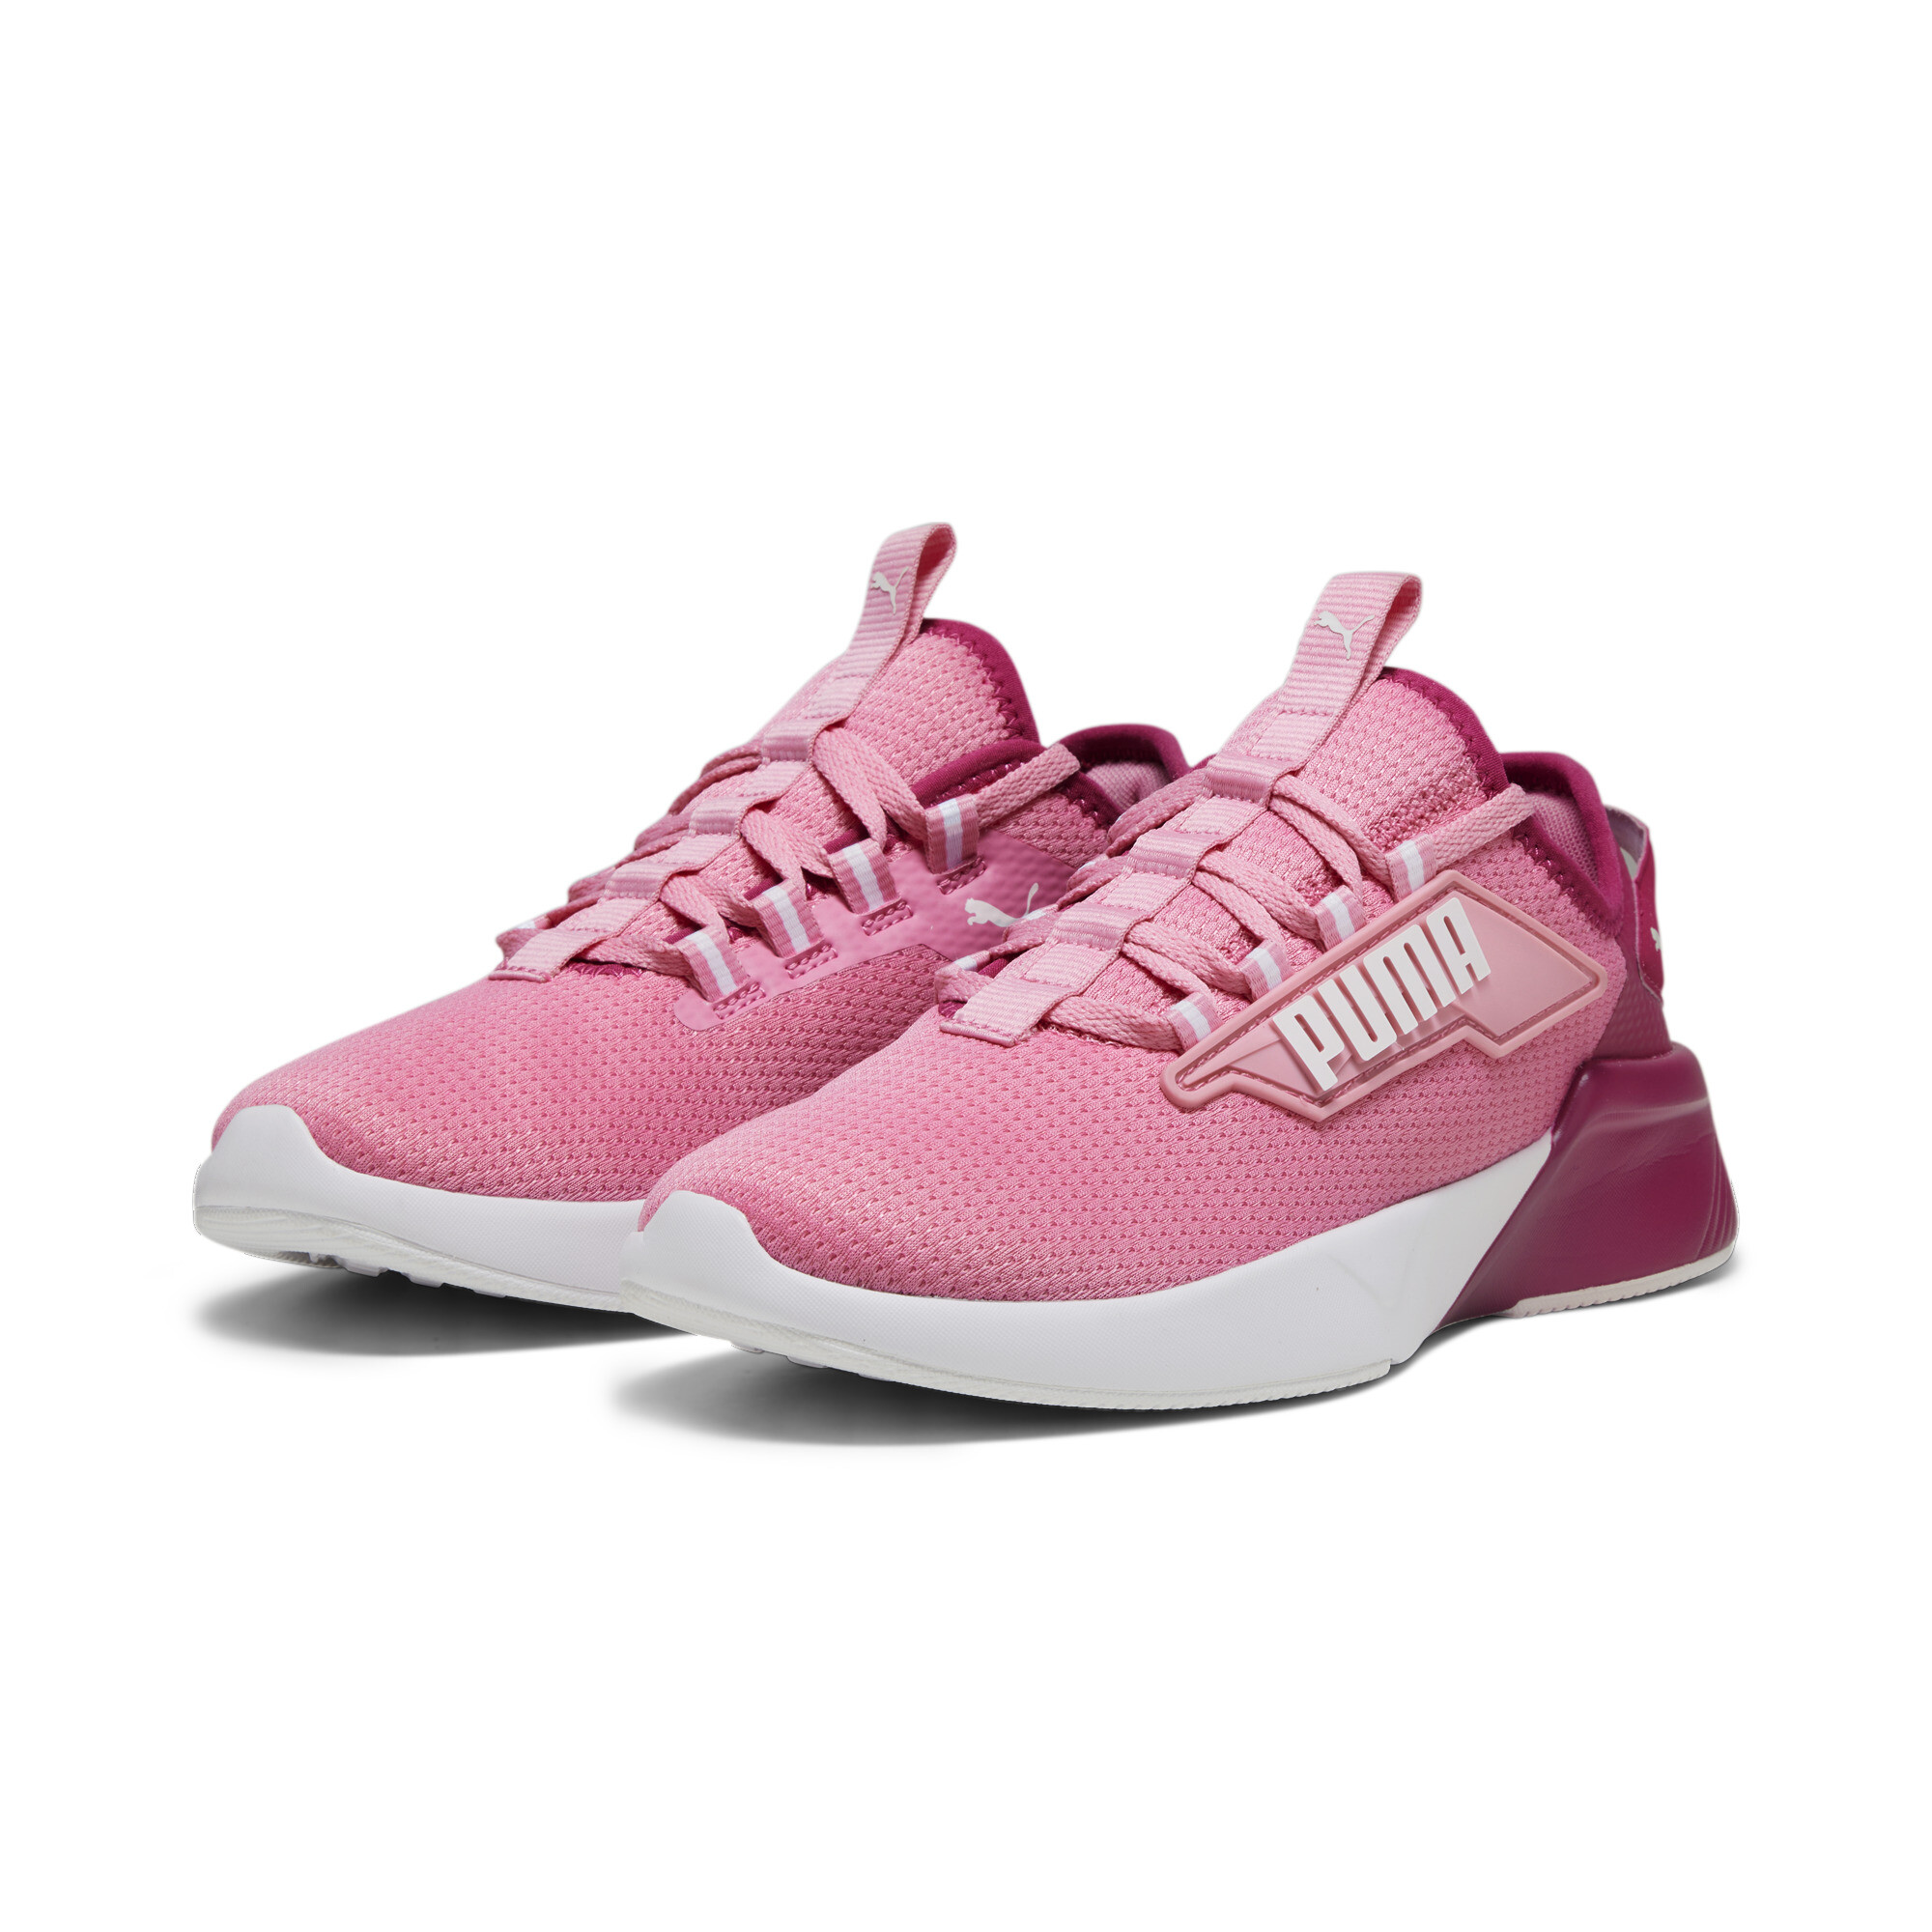 Puma Retaliate 2 Sneakers Youth, Pink, Size 39, Shoes